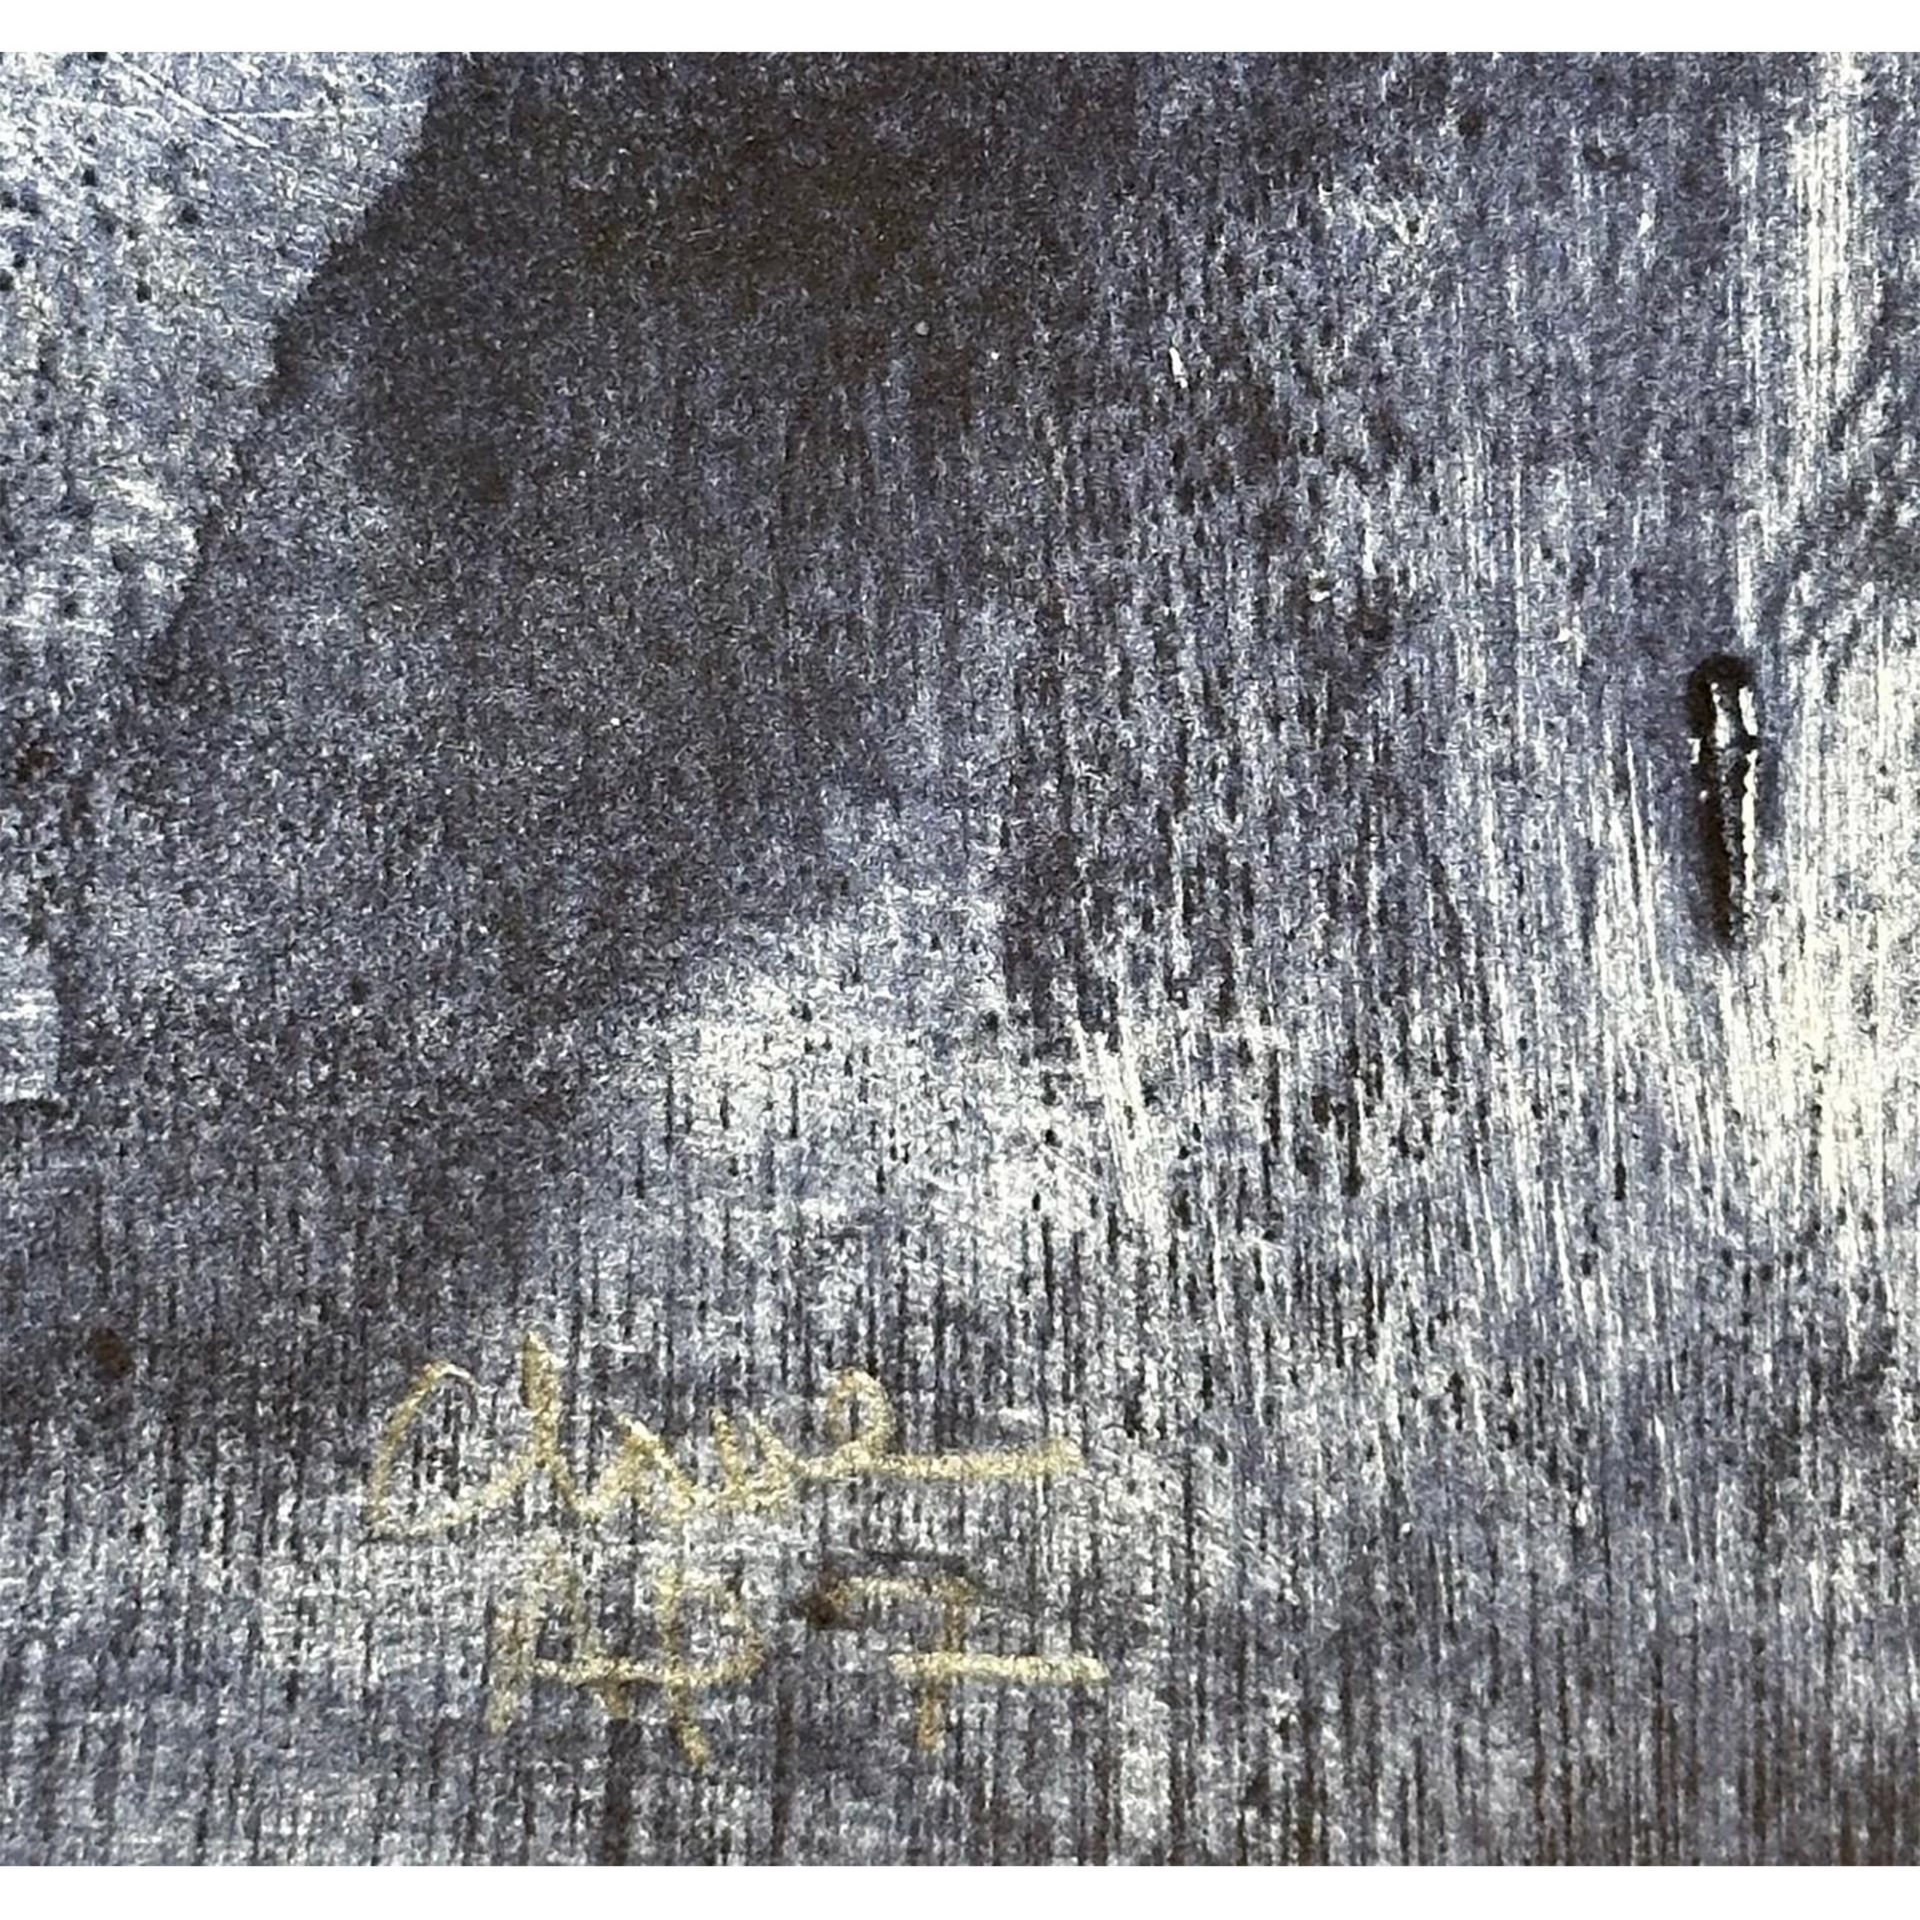 Antoni Clave (1913-2005) Carborundum Etching and Embossing, Untitled (Blue), Signed - Image 2 of 2